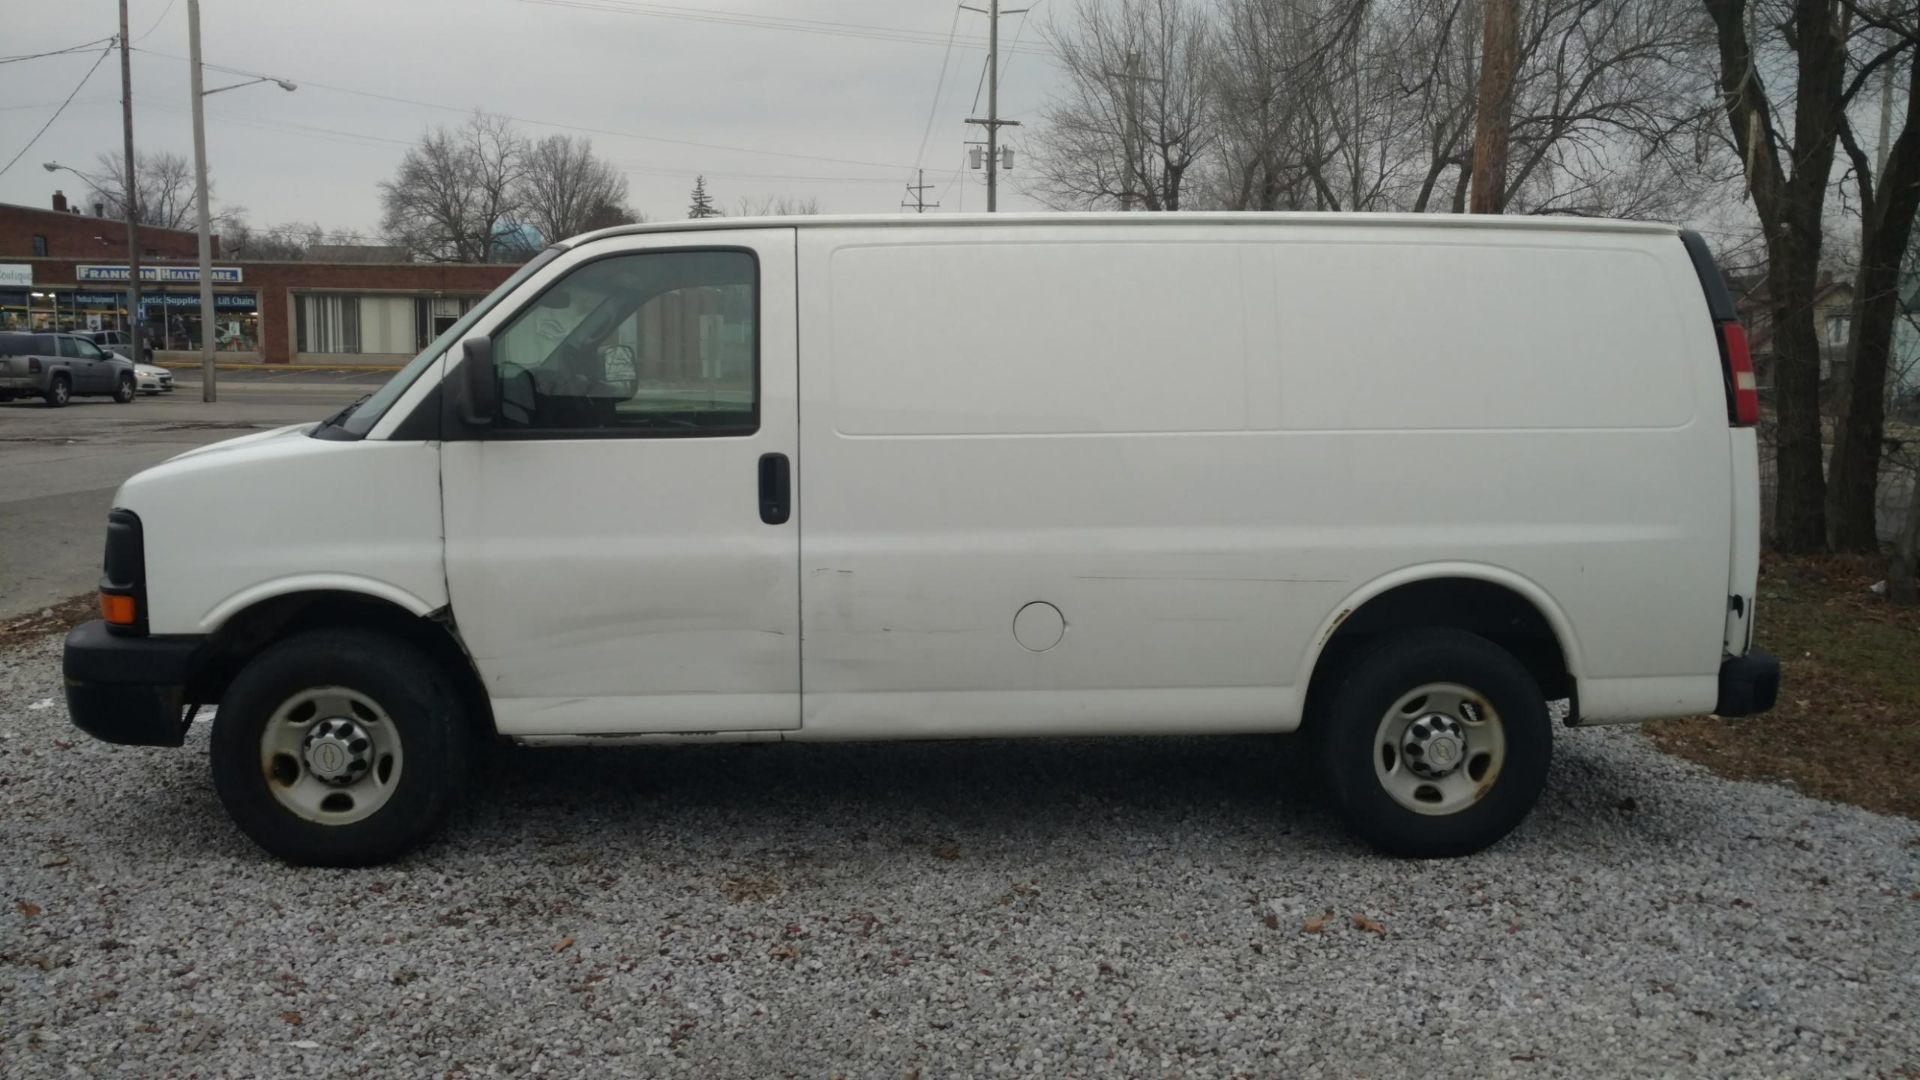 2010 Chevrolet Express Automatic, Air Conditioning, G2500, VIN: 1GCZGFDA1A1148324, 162,892 Miles